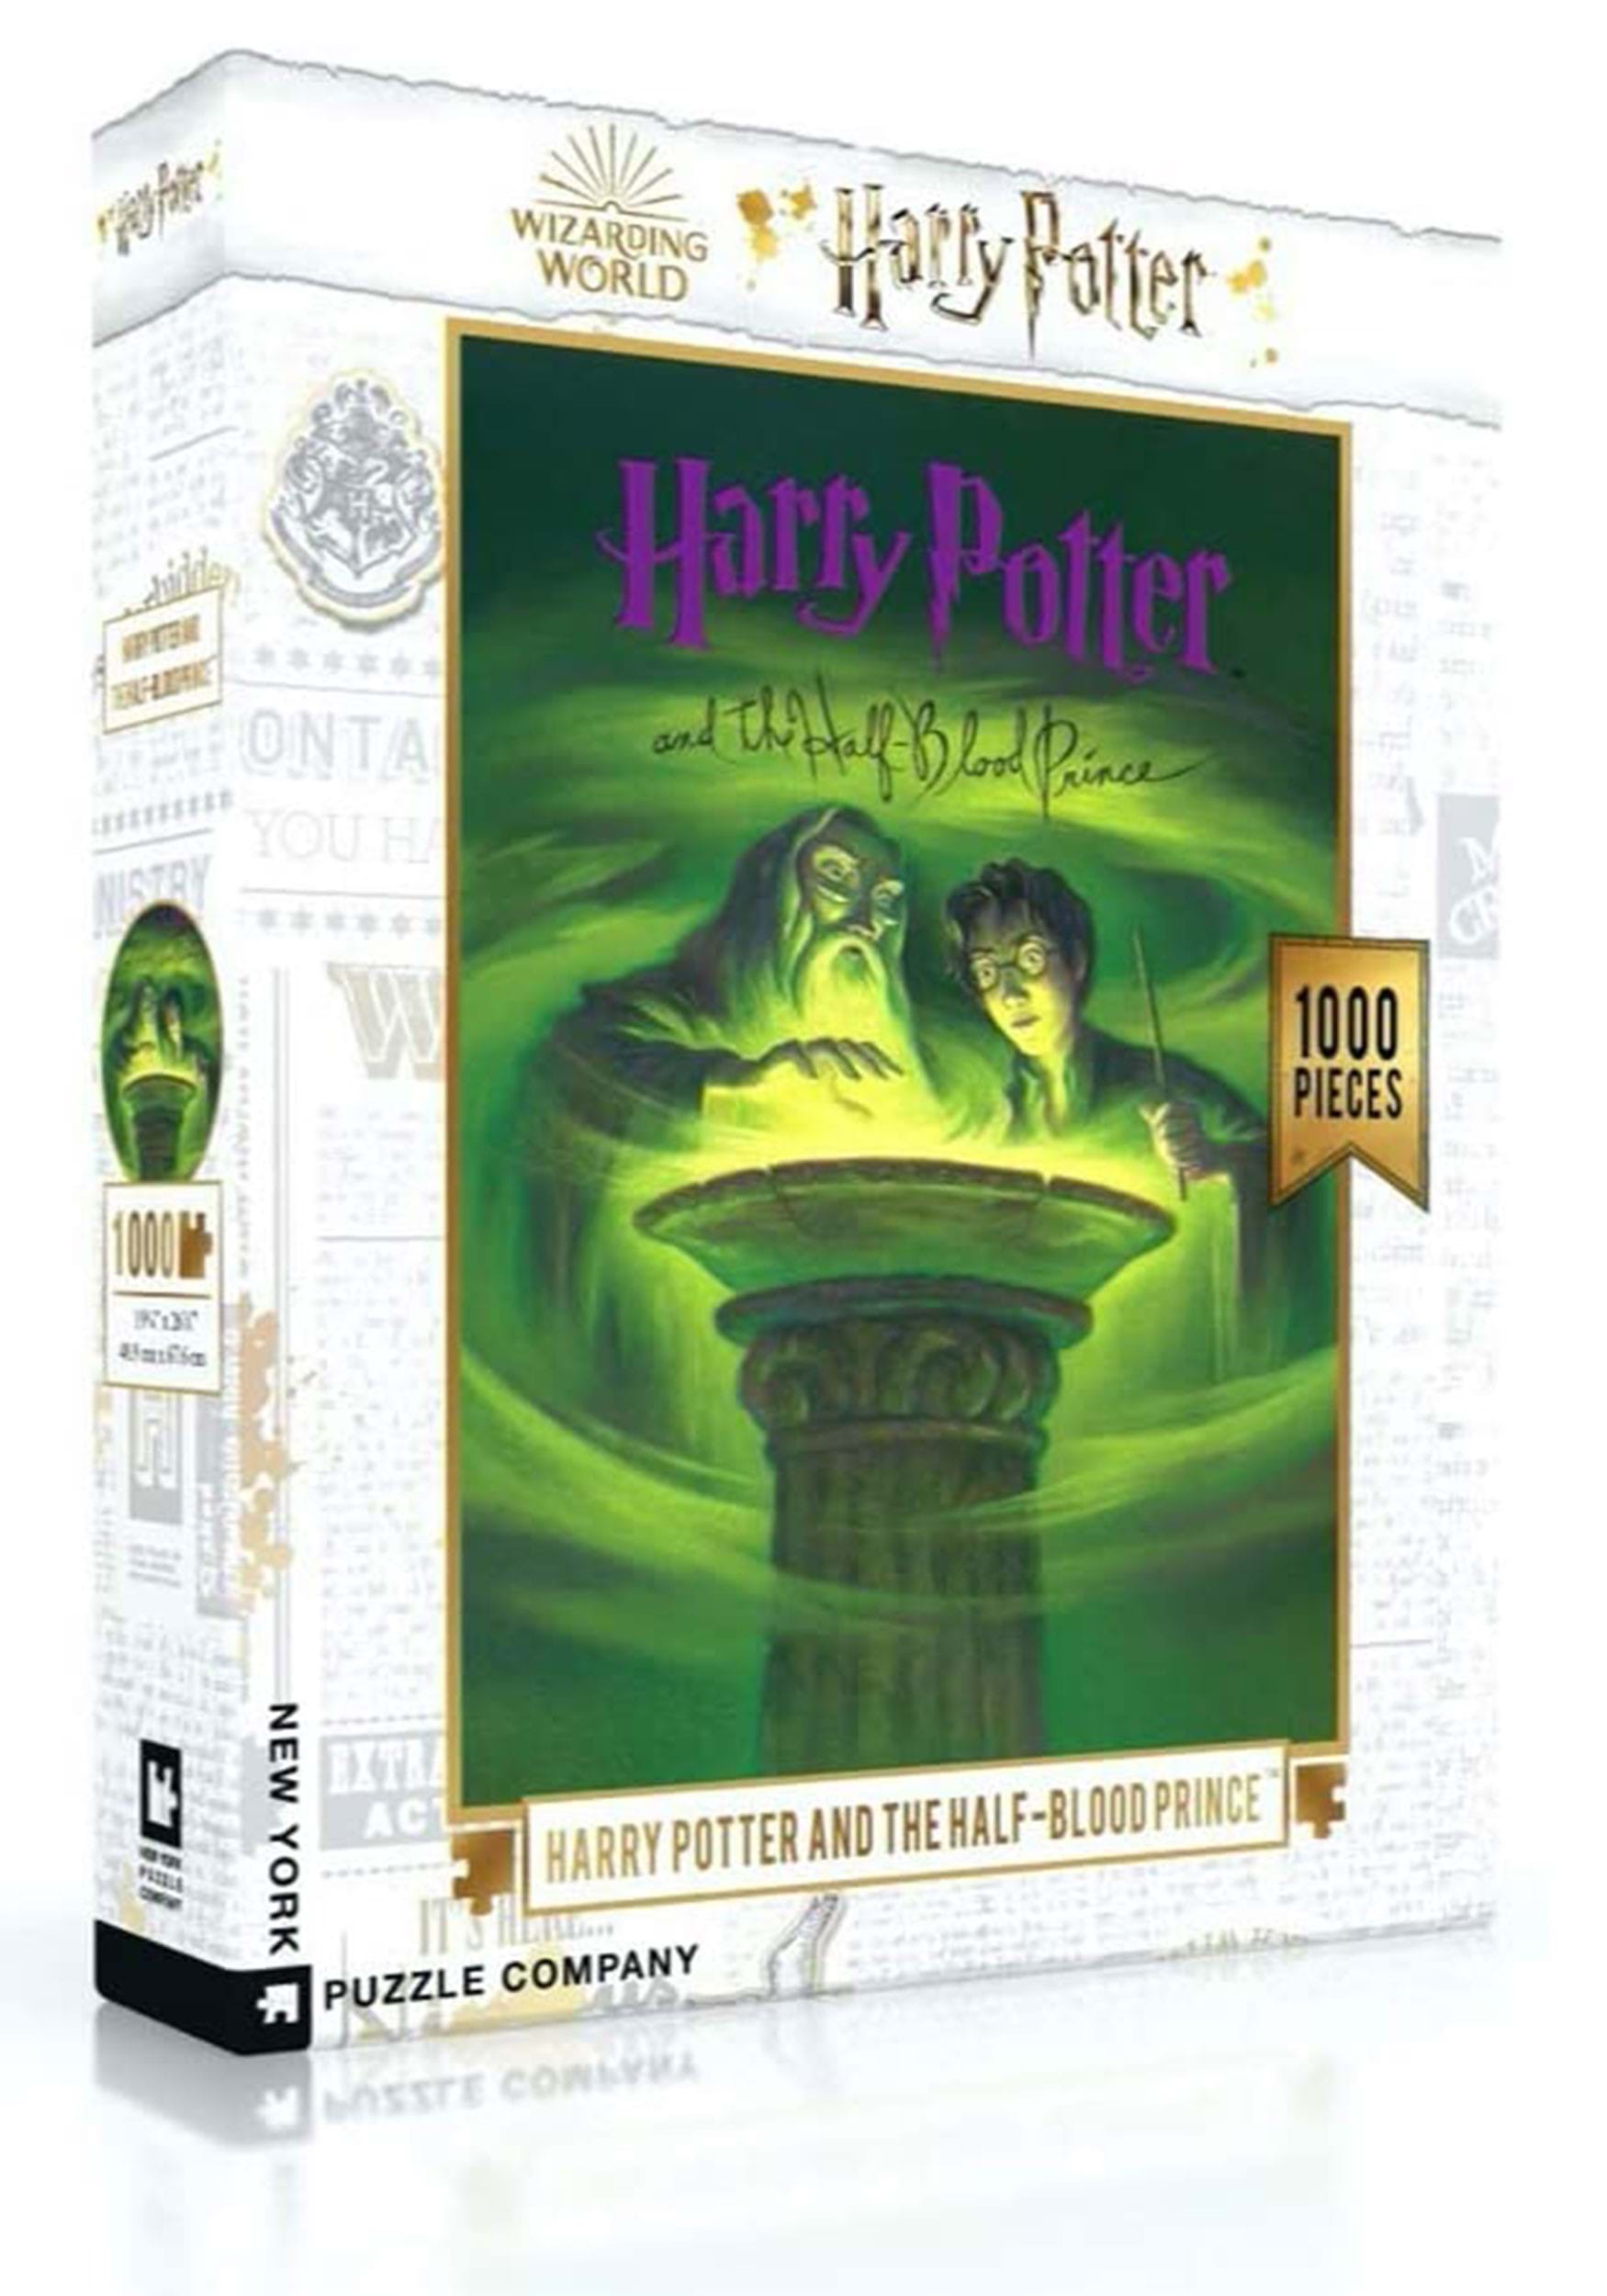 1000 pc Harry Potter and the Half-Blood Prince Jigsaw Puzzle